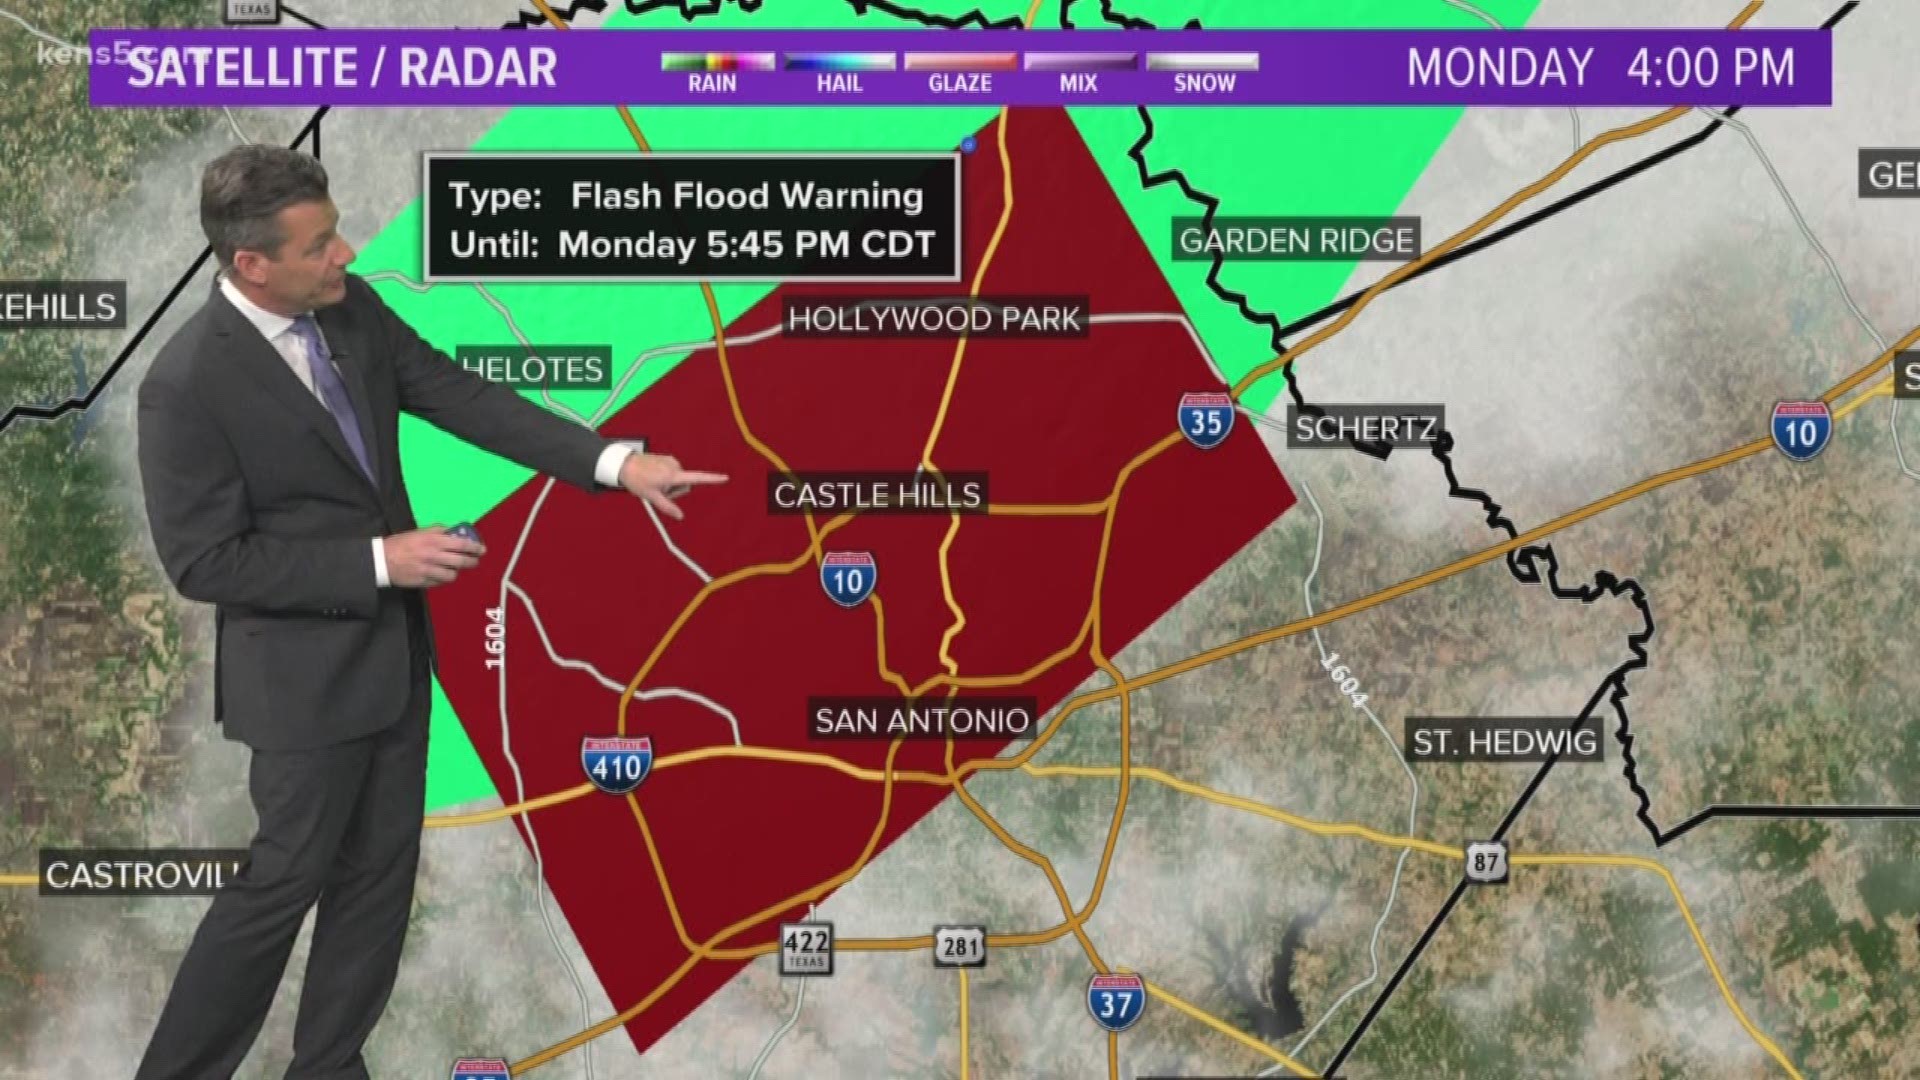 A Flash Flood Warning is in effect for San Antonio until 5:45 p.m. More than 29,000 people lost power, according to CPS Energy.